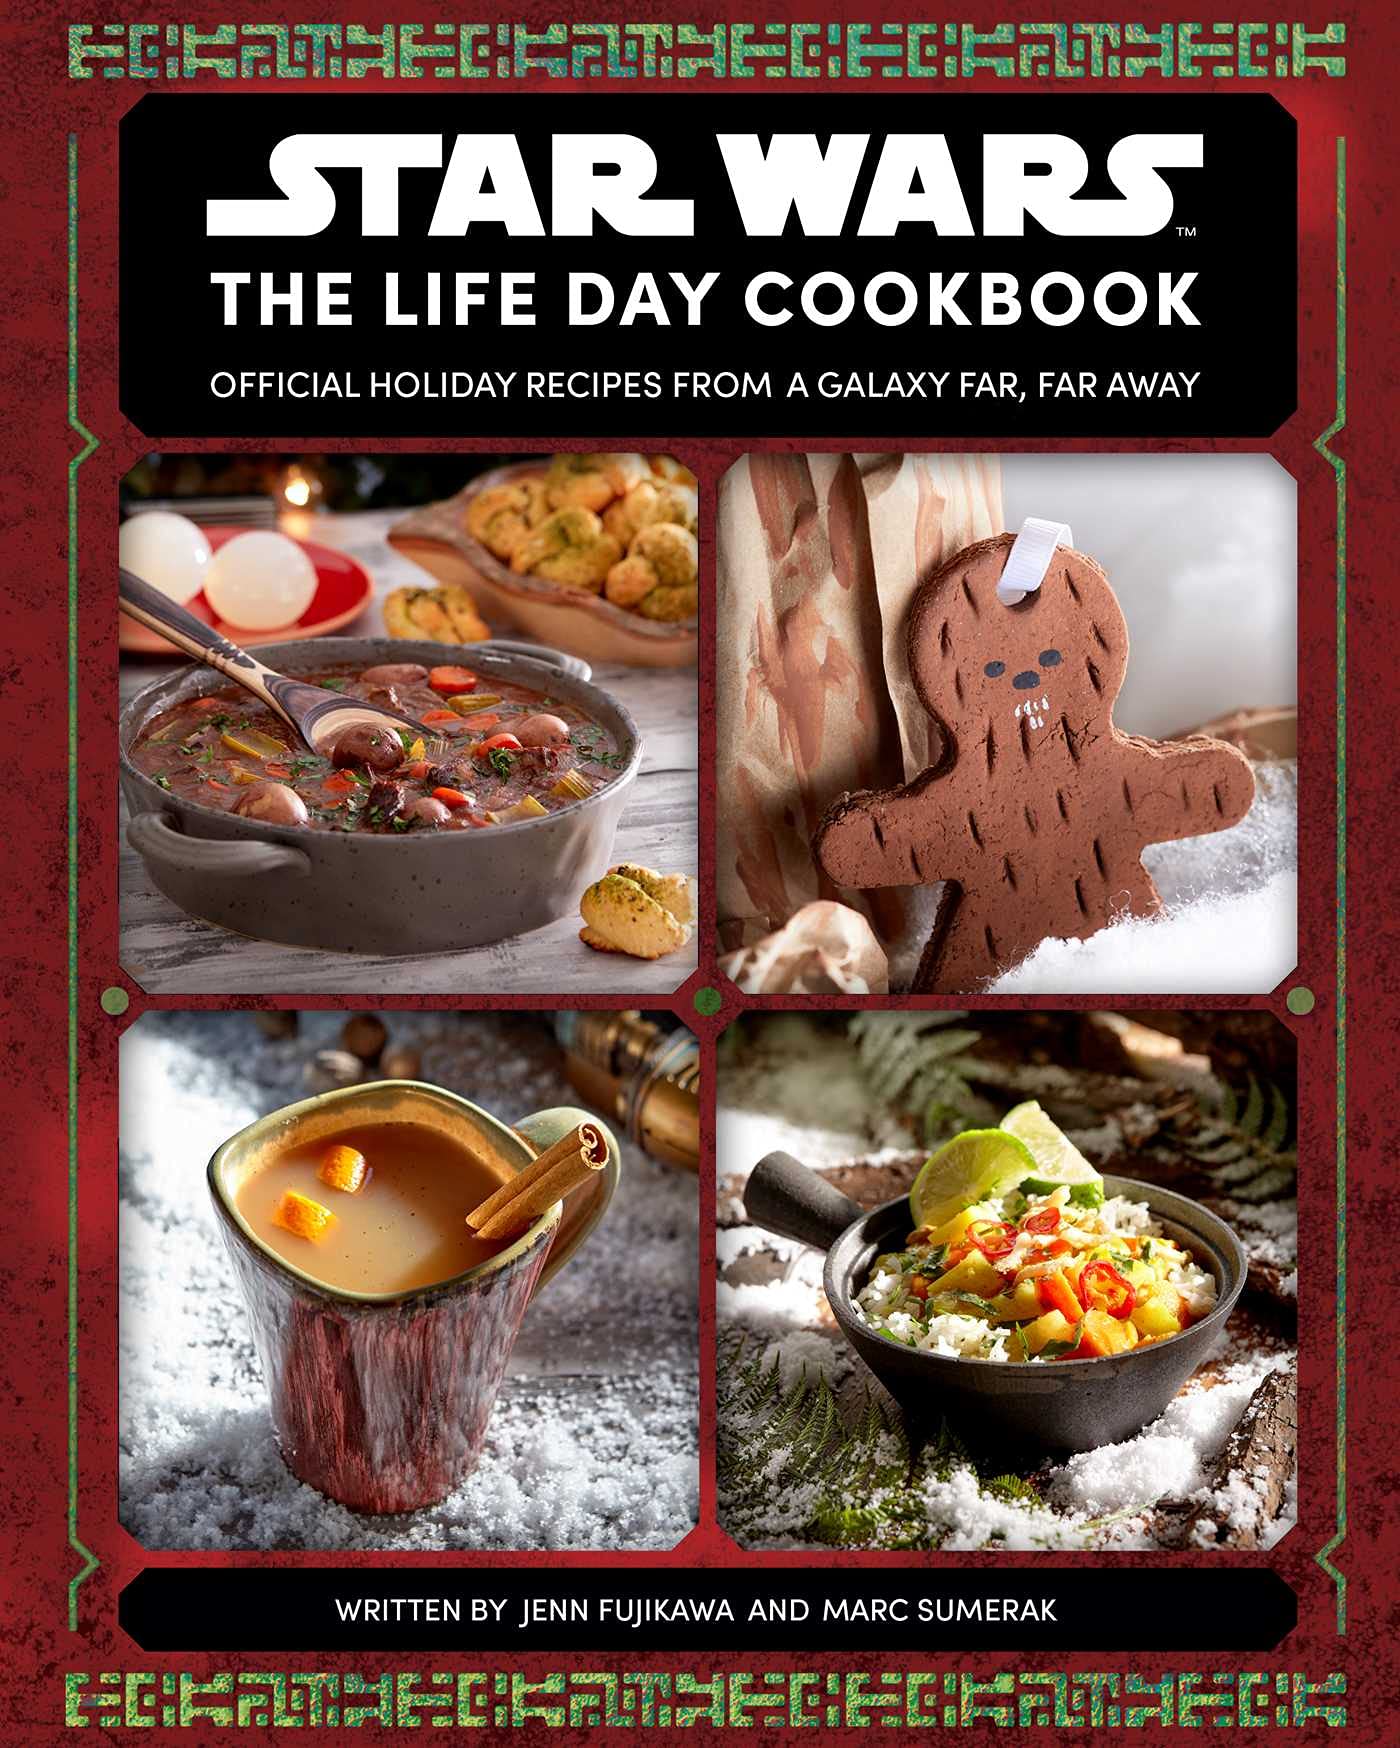 Star Wars The Life Day Cookbook: Official Holiday Recipes From A Galaxy Far, Far Away